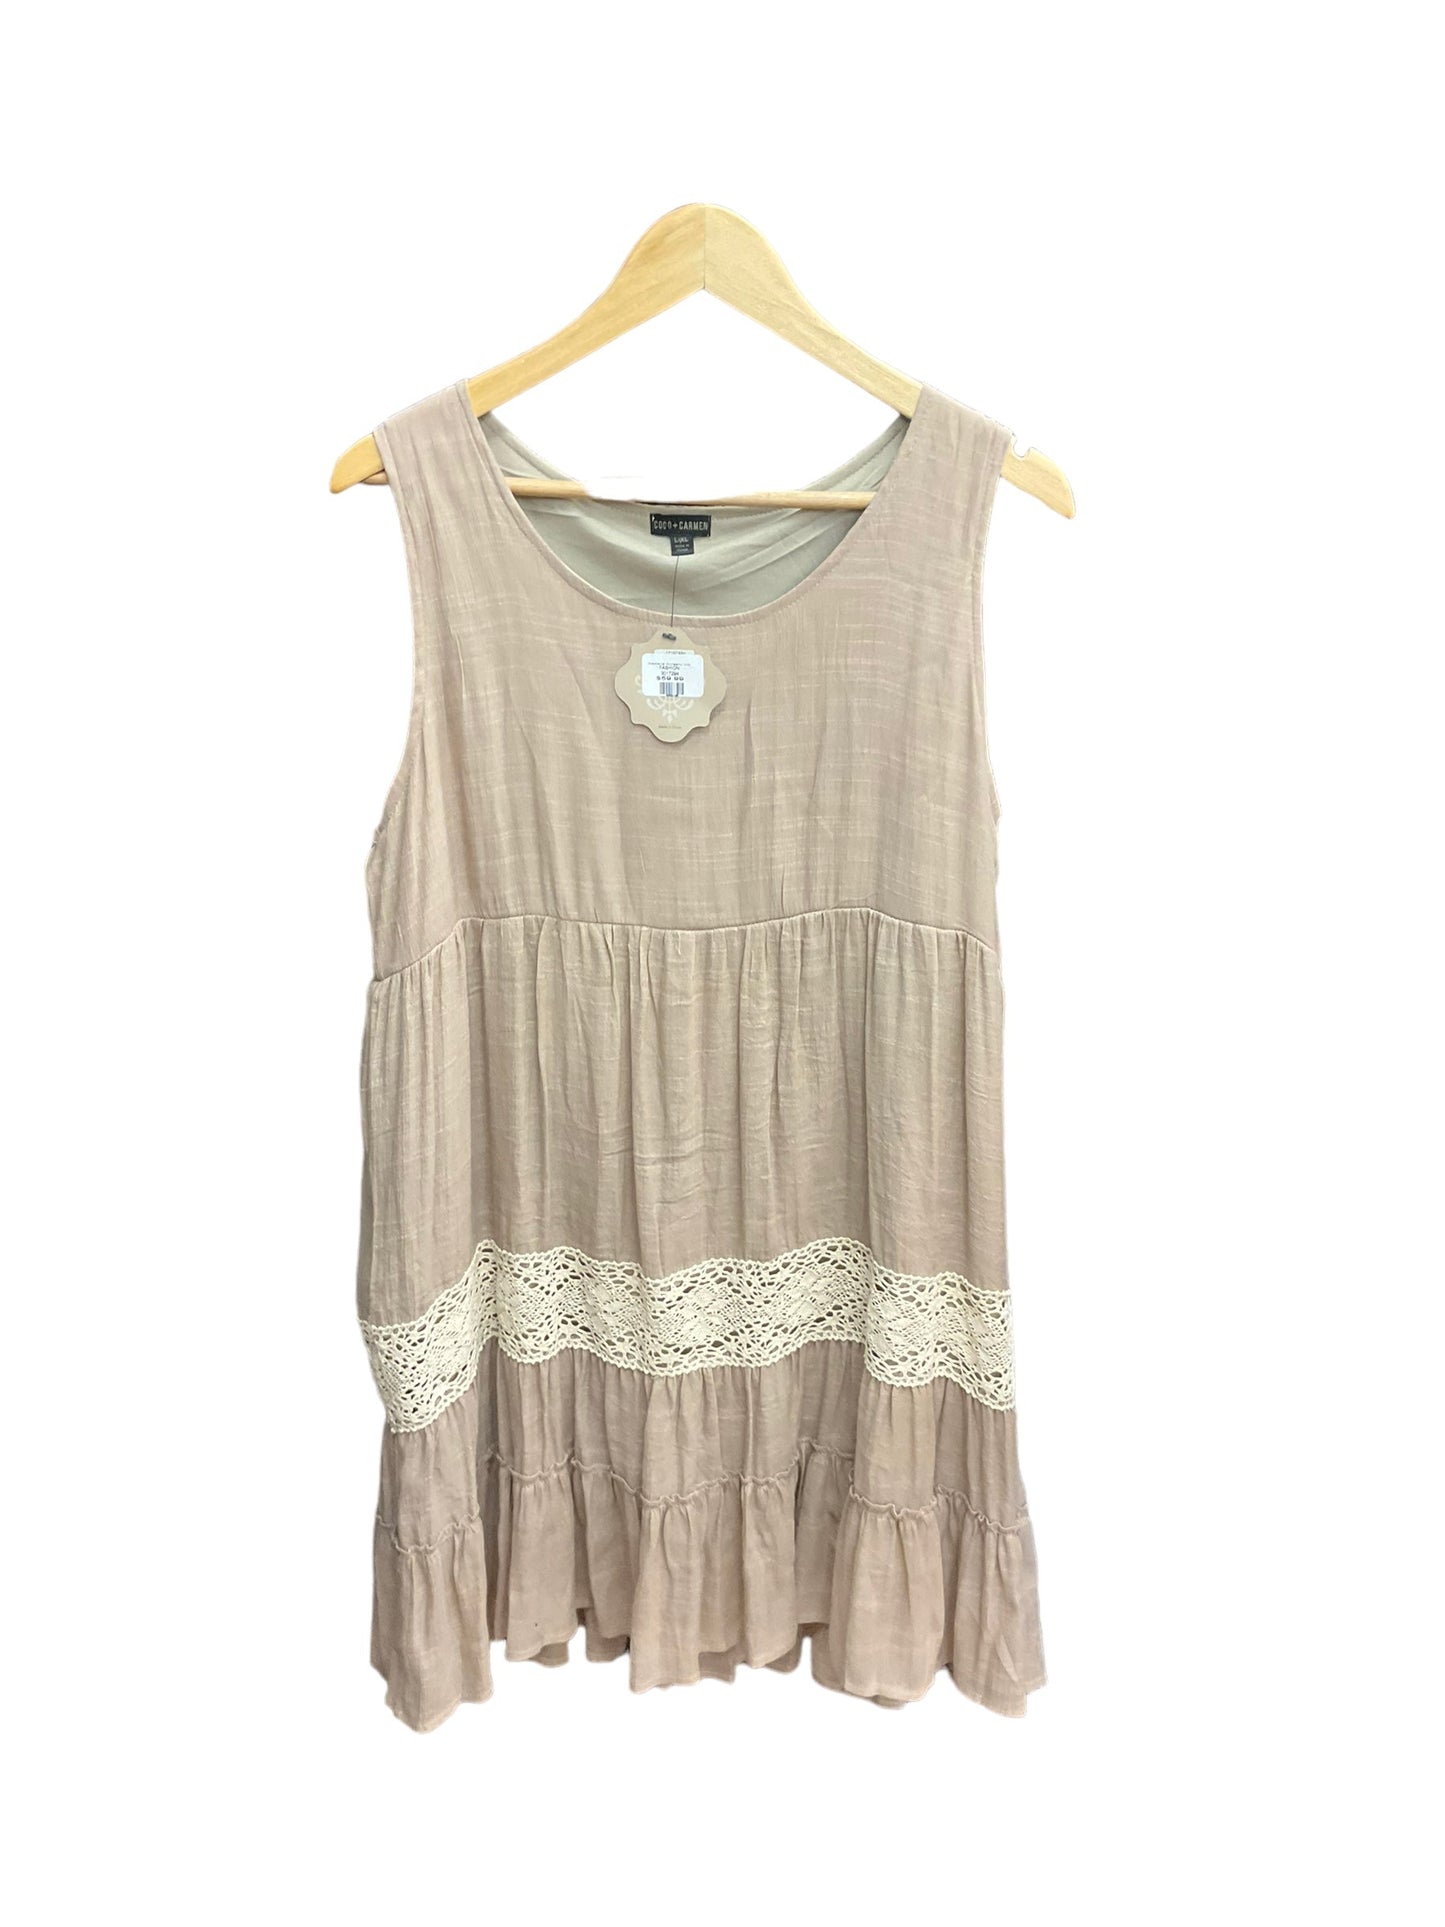 Tan Dress Casual Short Coco And Carmen, Size L